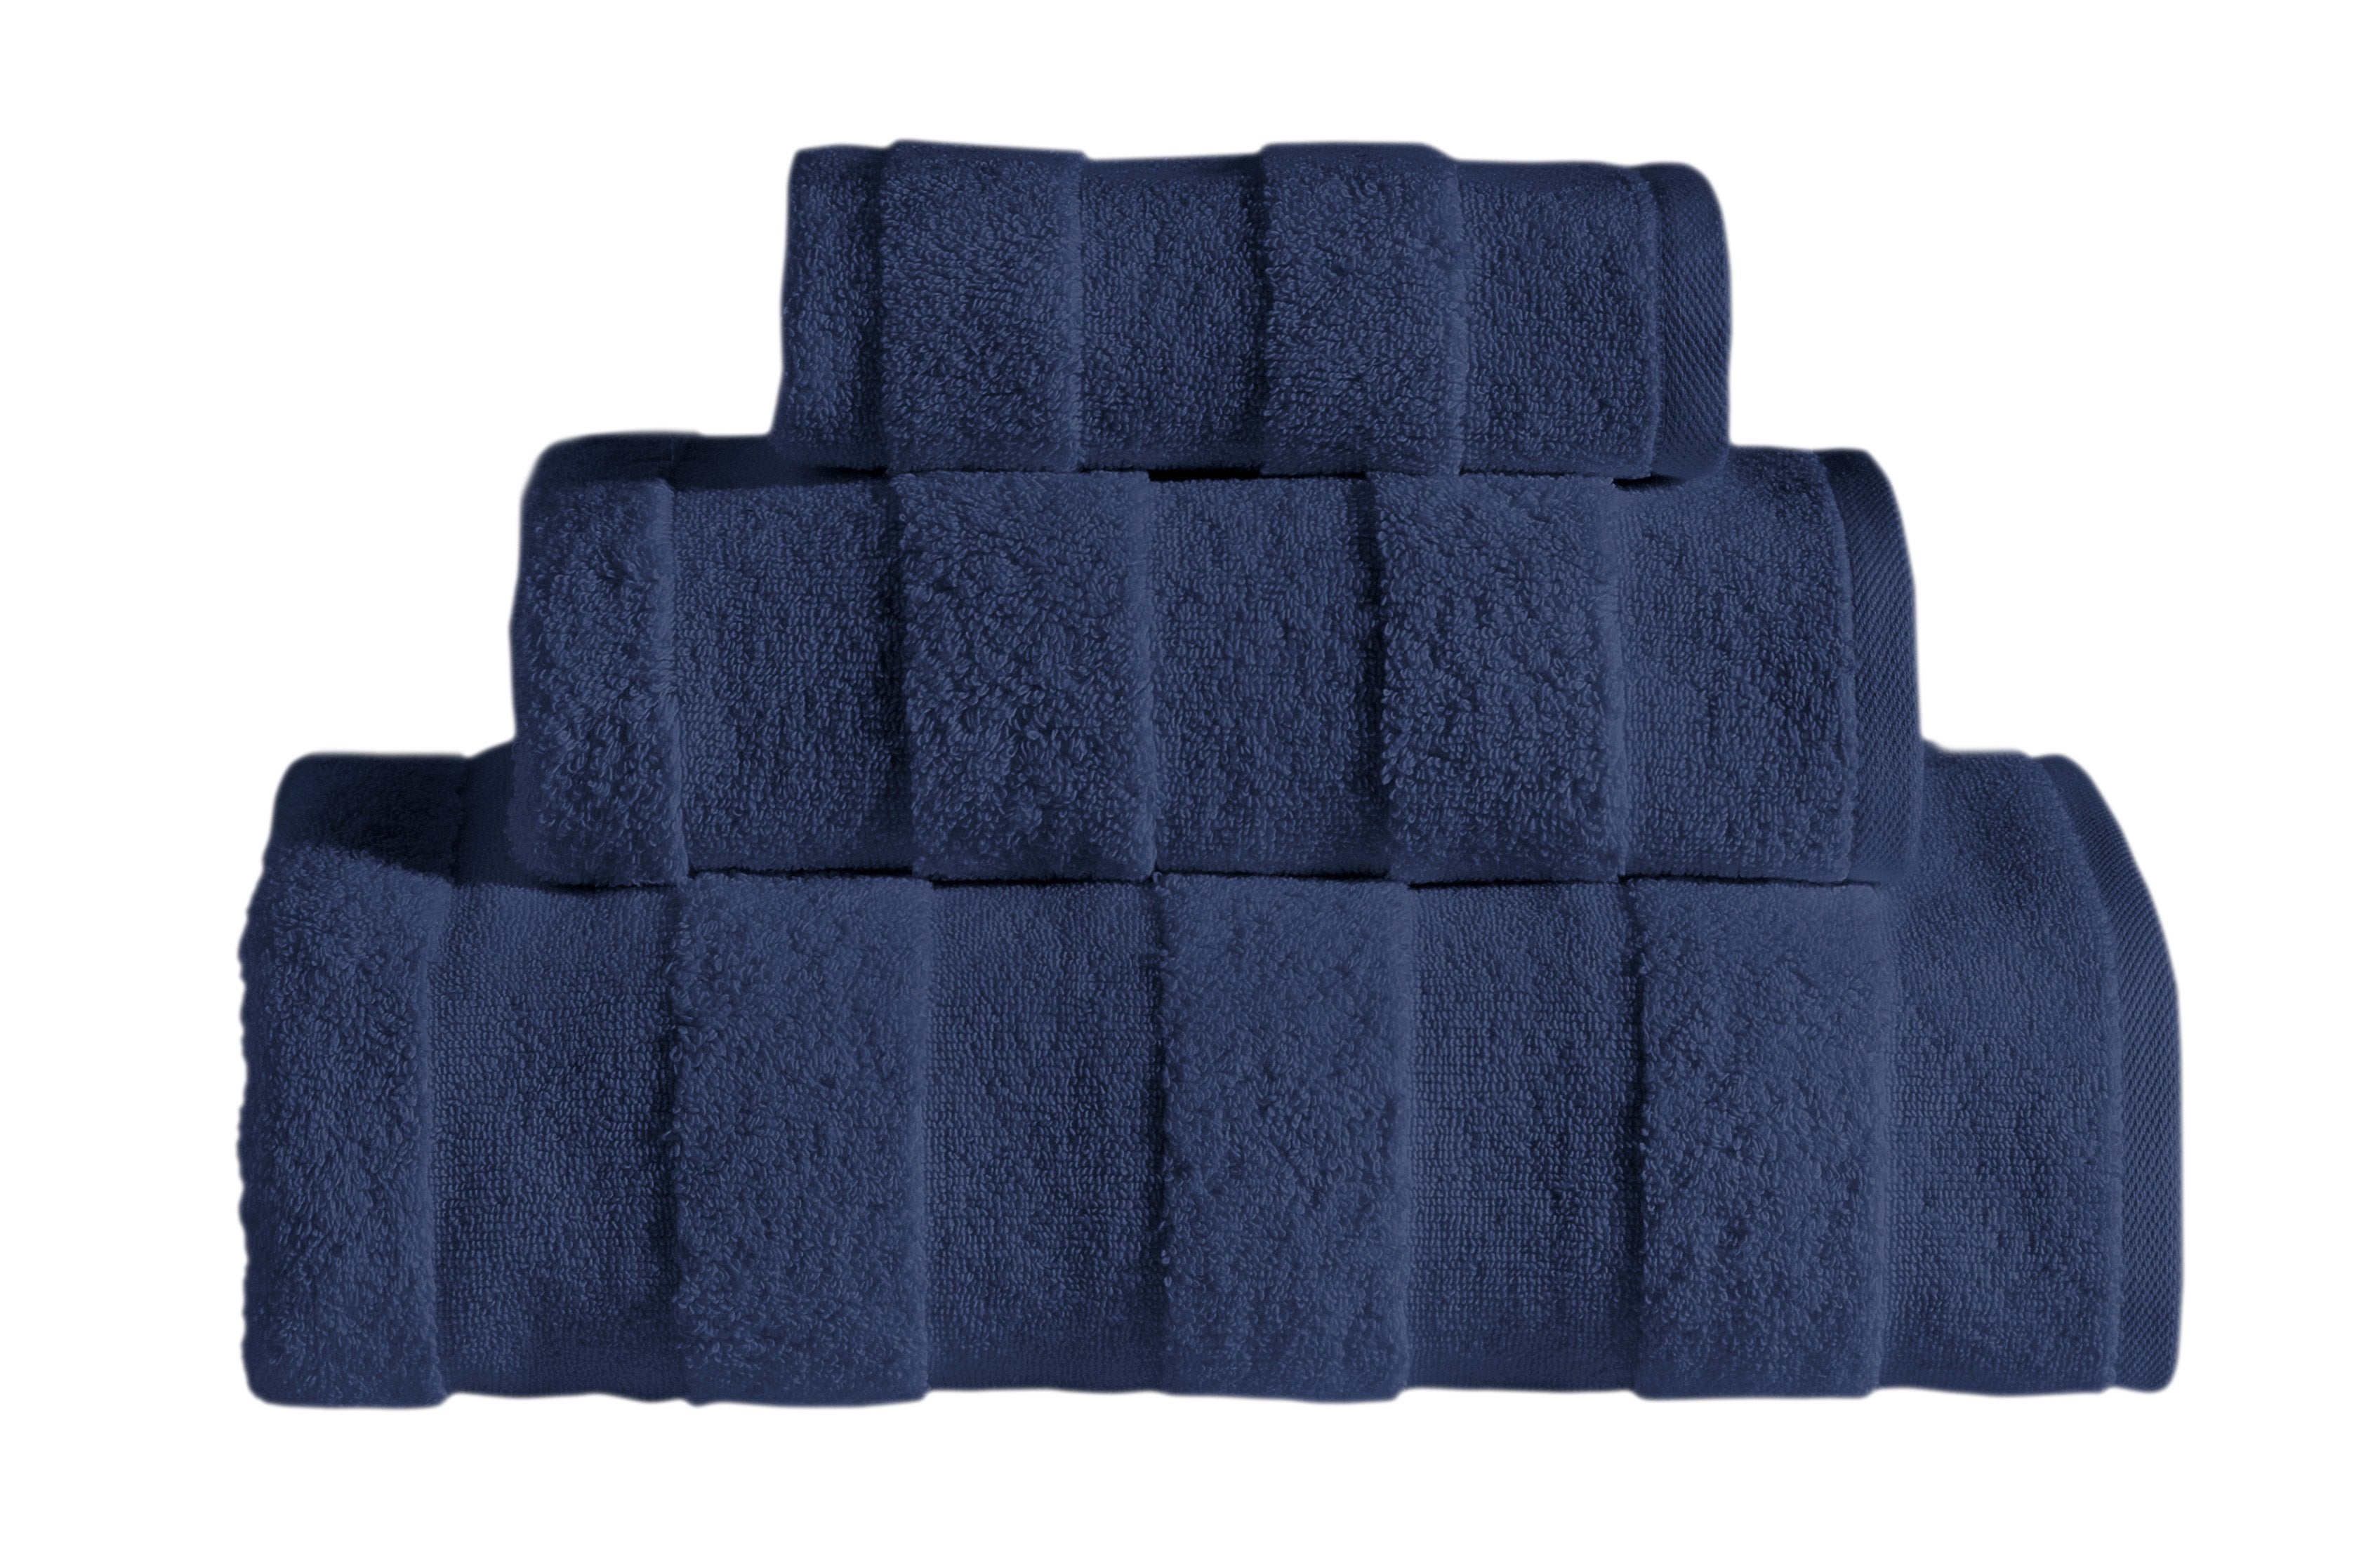 Apogee Collection Luxury 3 PK Towels Set - True Navy By SaaSoh